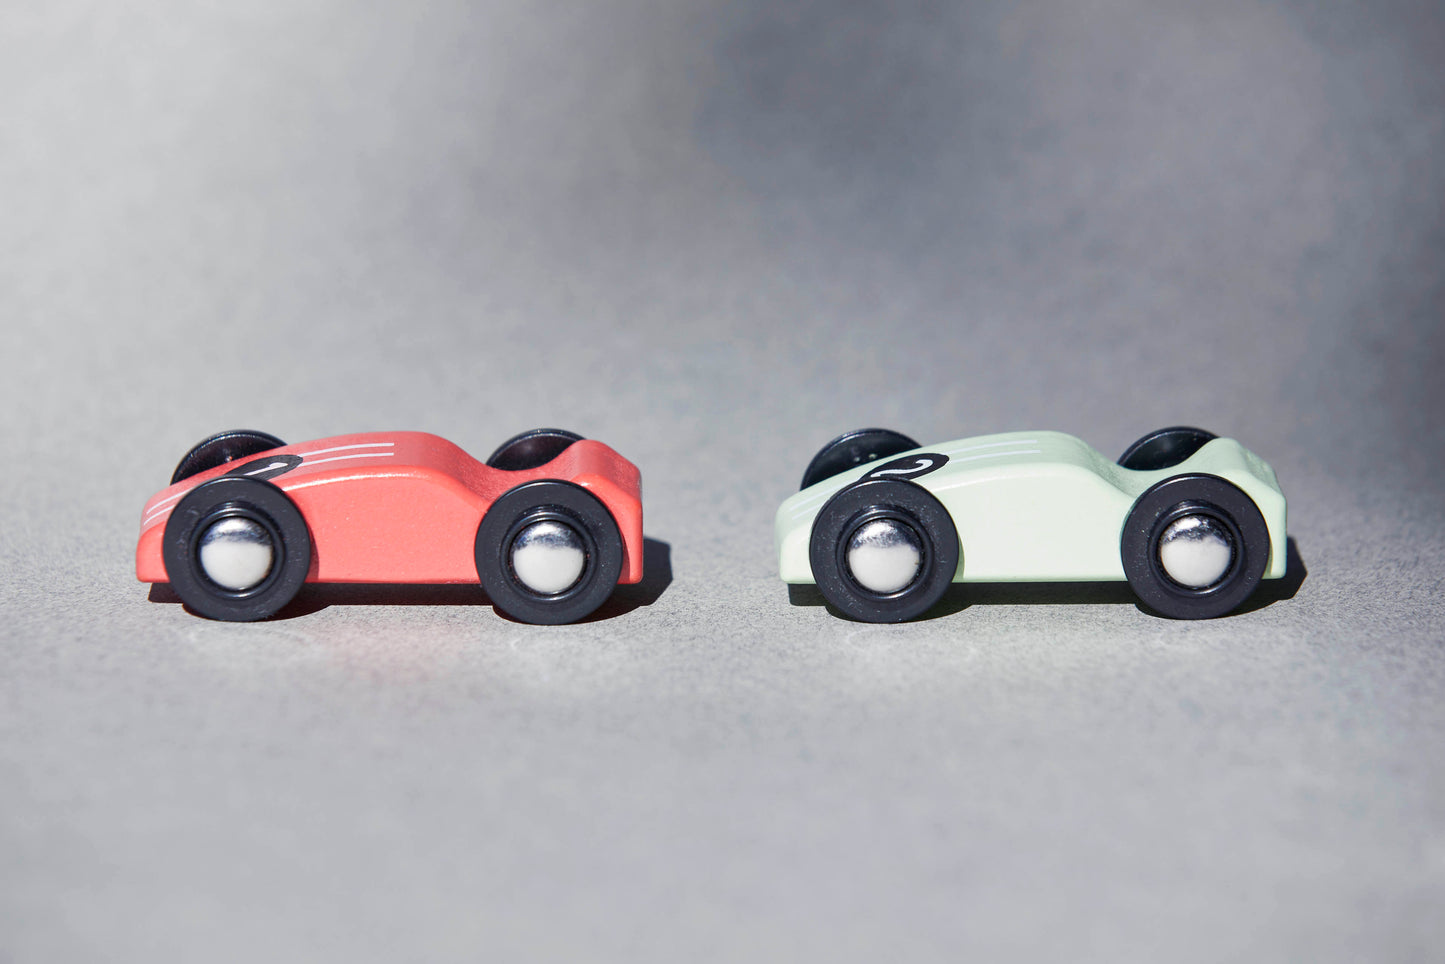 2 stylish retro wooden racing cars, made from sustainable FSC timber and environmentally friendly paint.